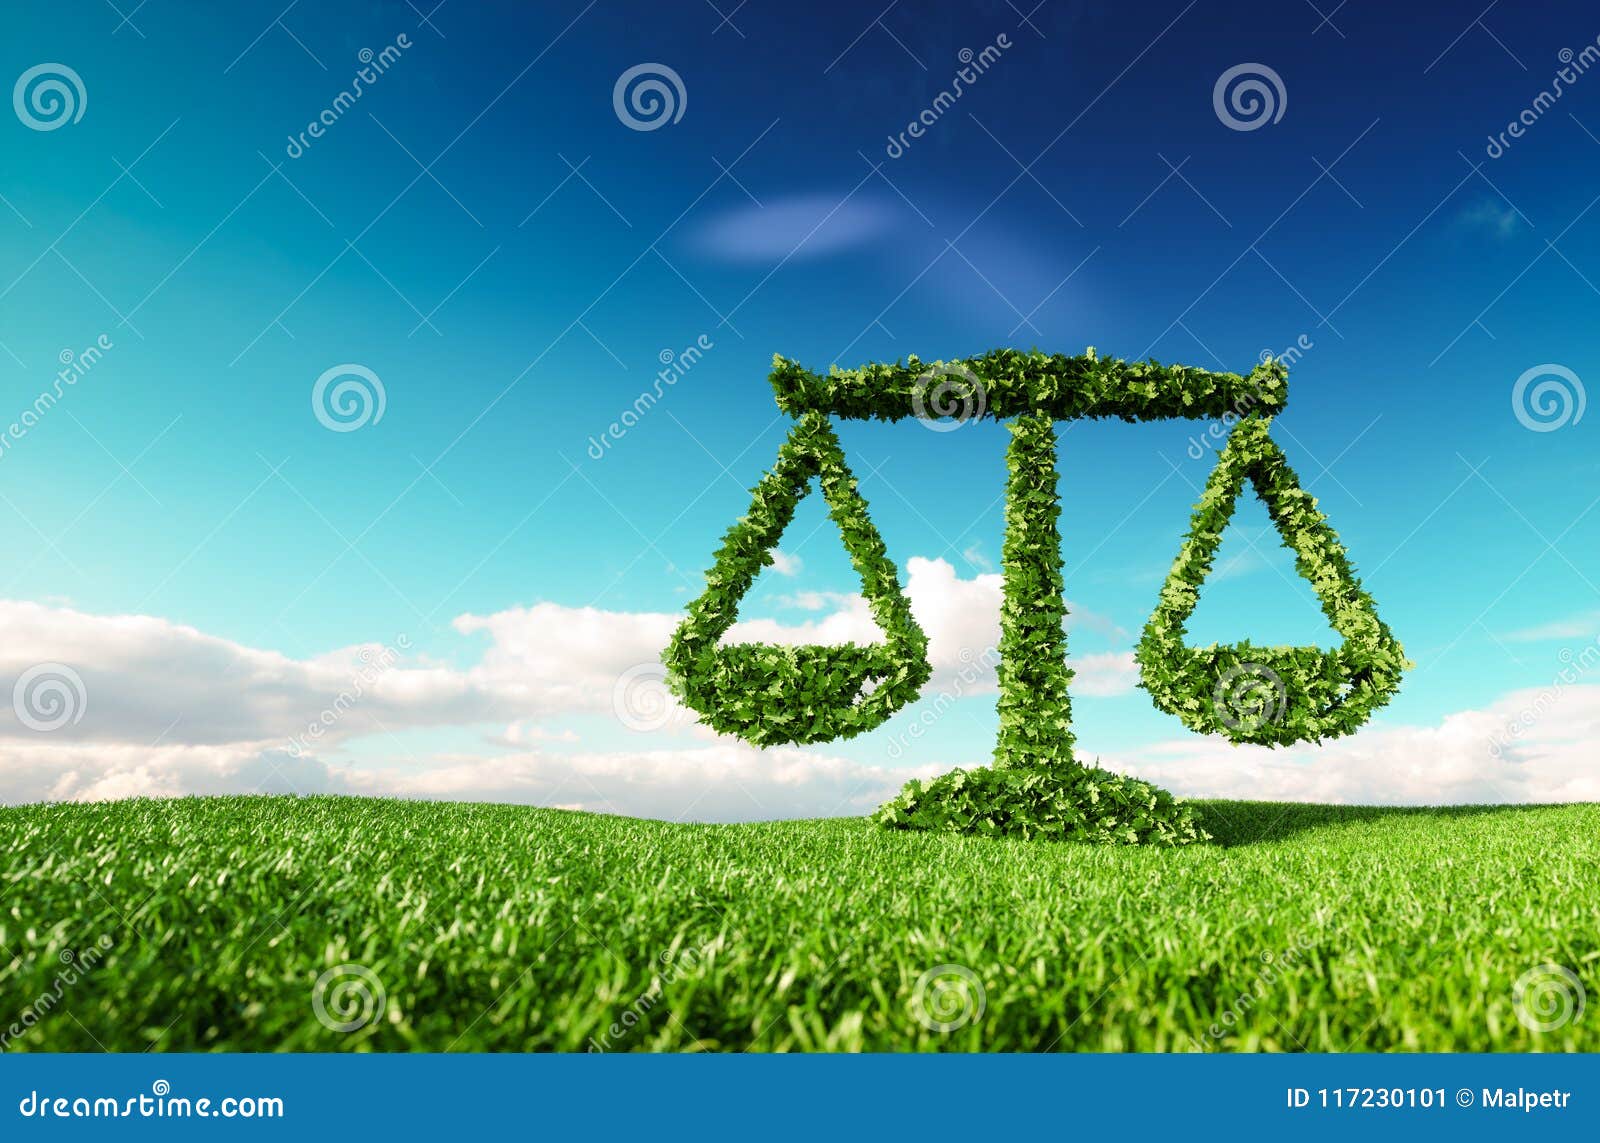 eco friendly law, politics and eco balance concept. 3d rendering